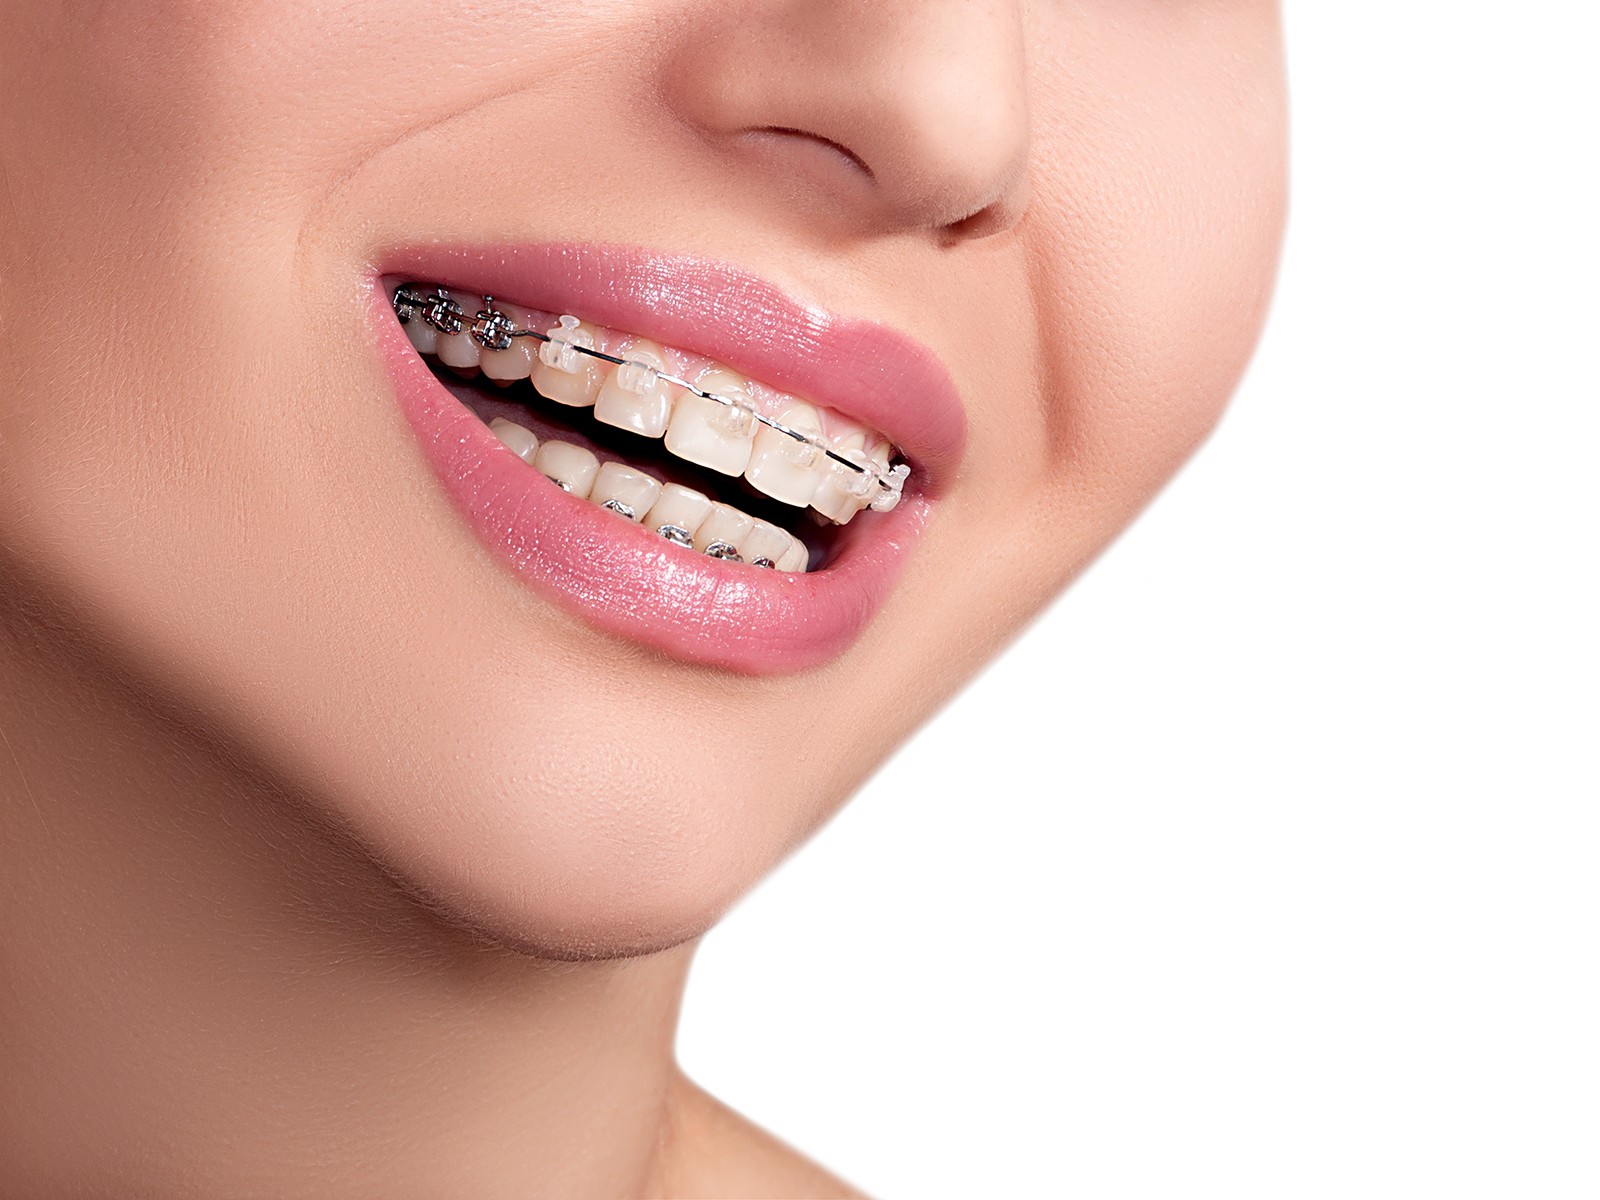 What are the pros and cons of having braces?